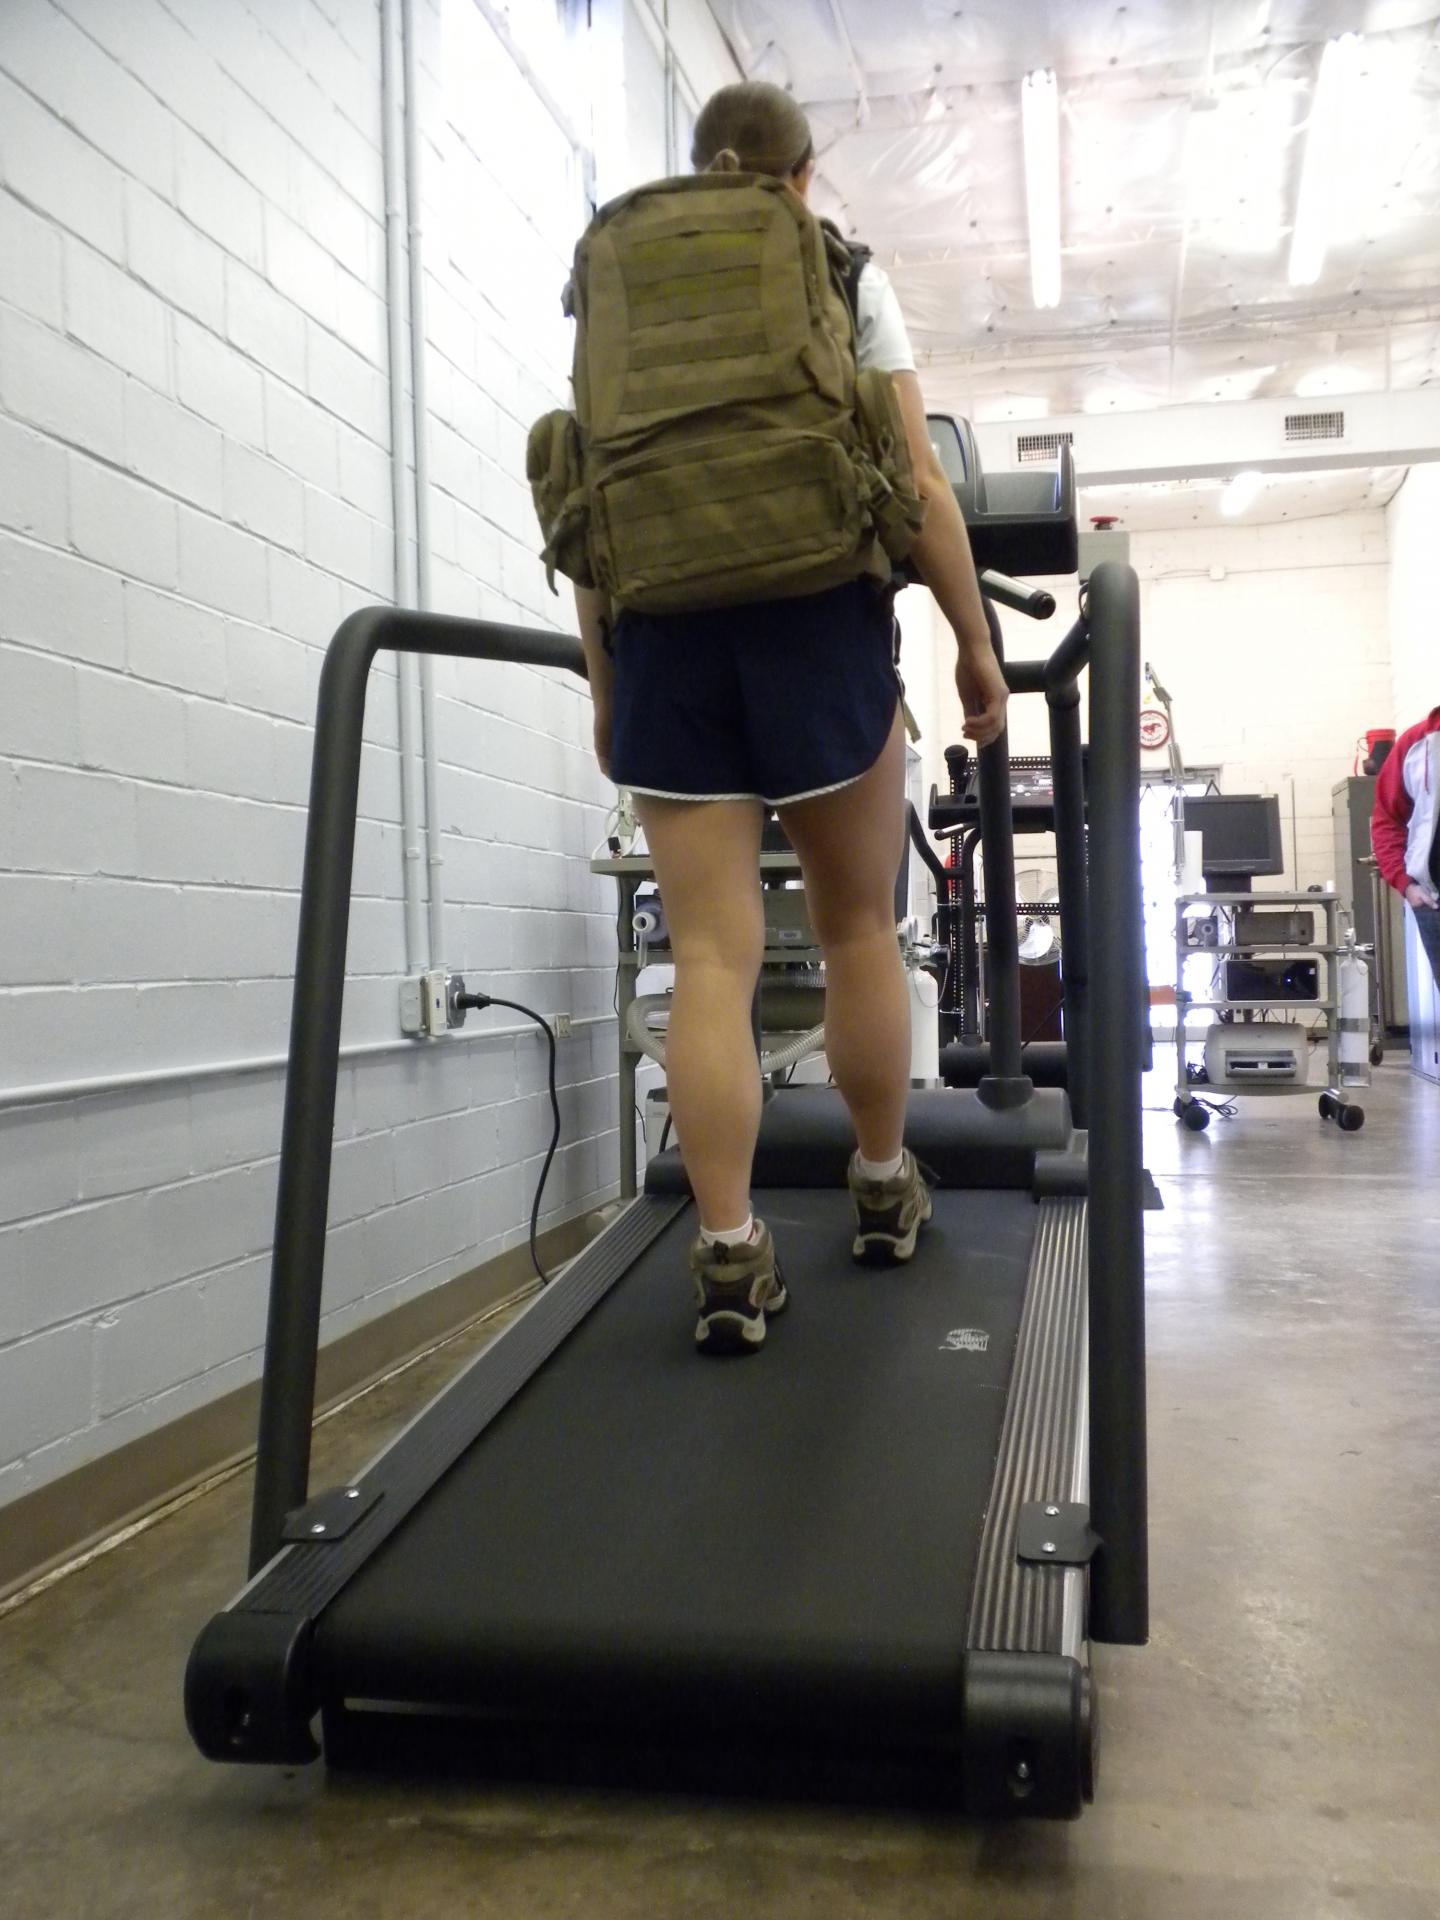 Study Subjects Tested on Treadmill